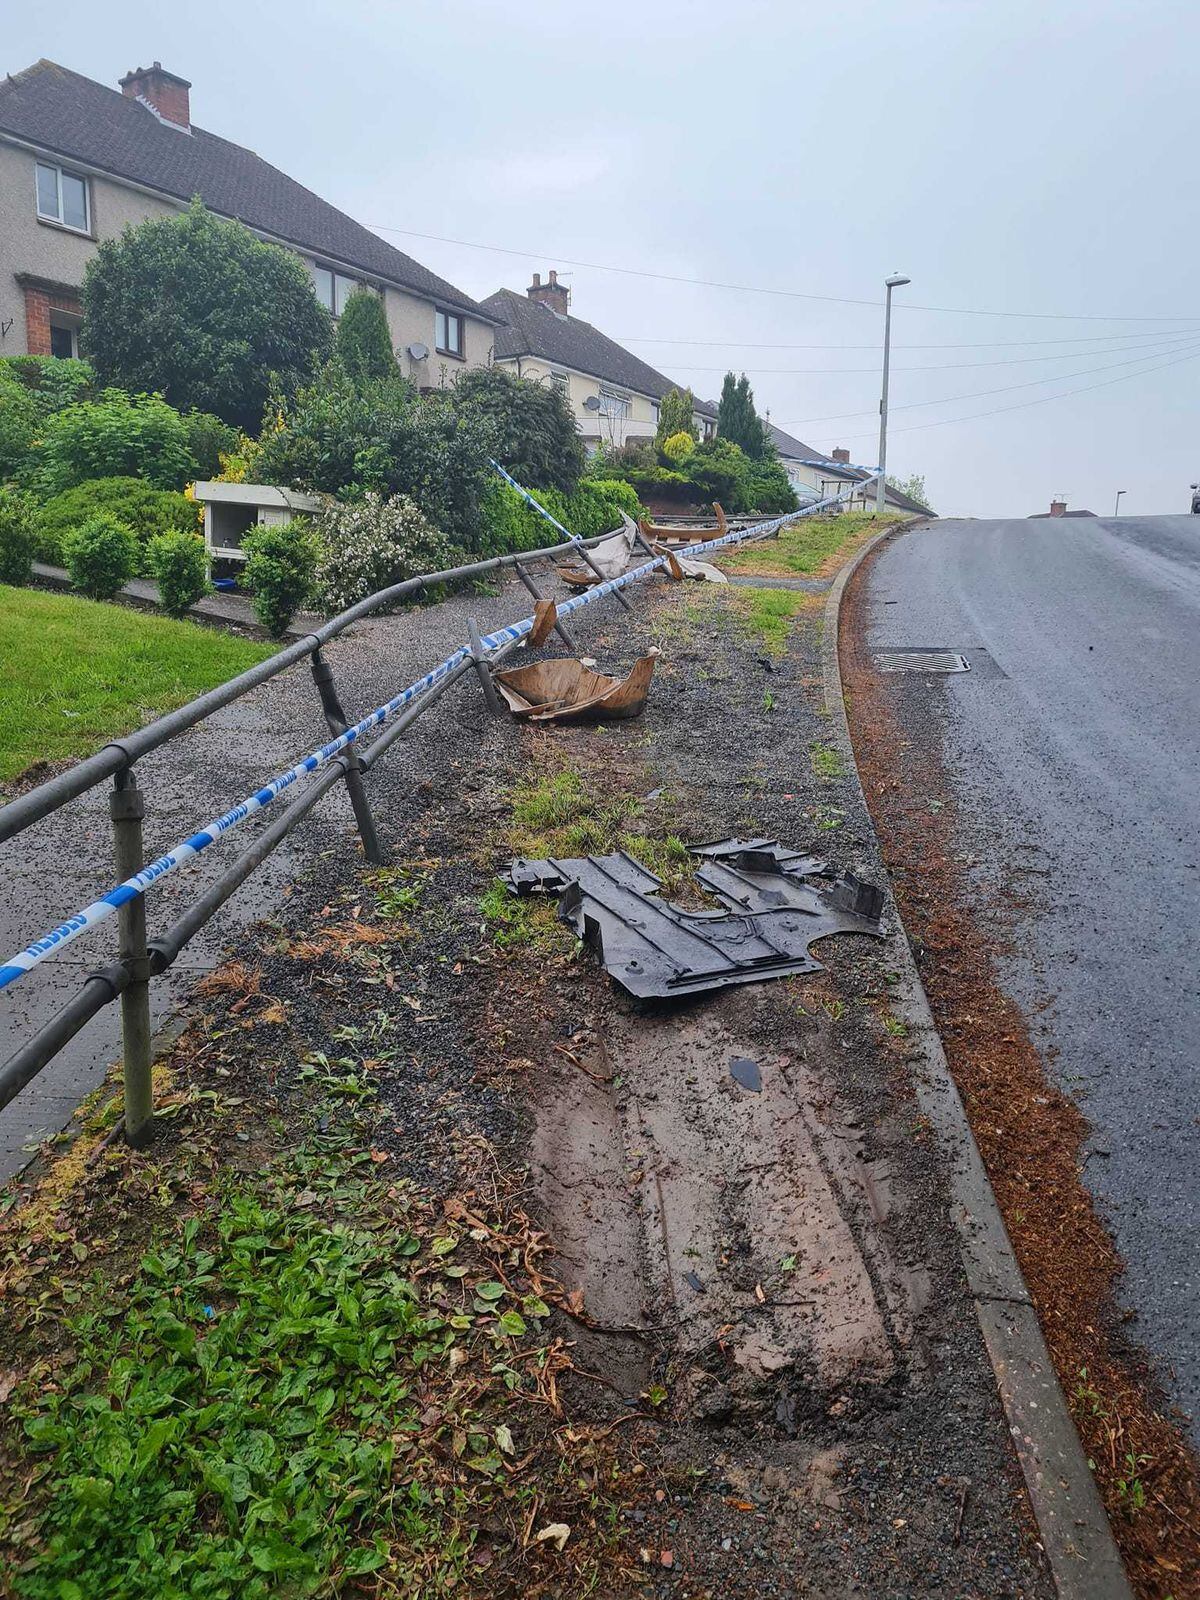 The driver fled after crashing through a set of railings and into a garden wall in Welshpool